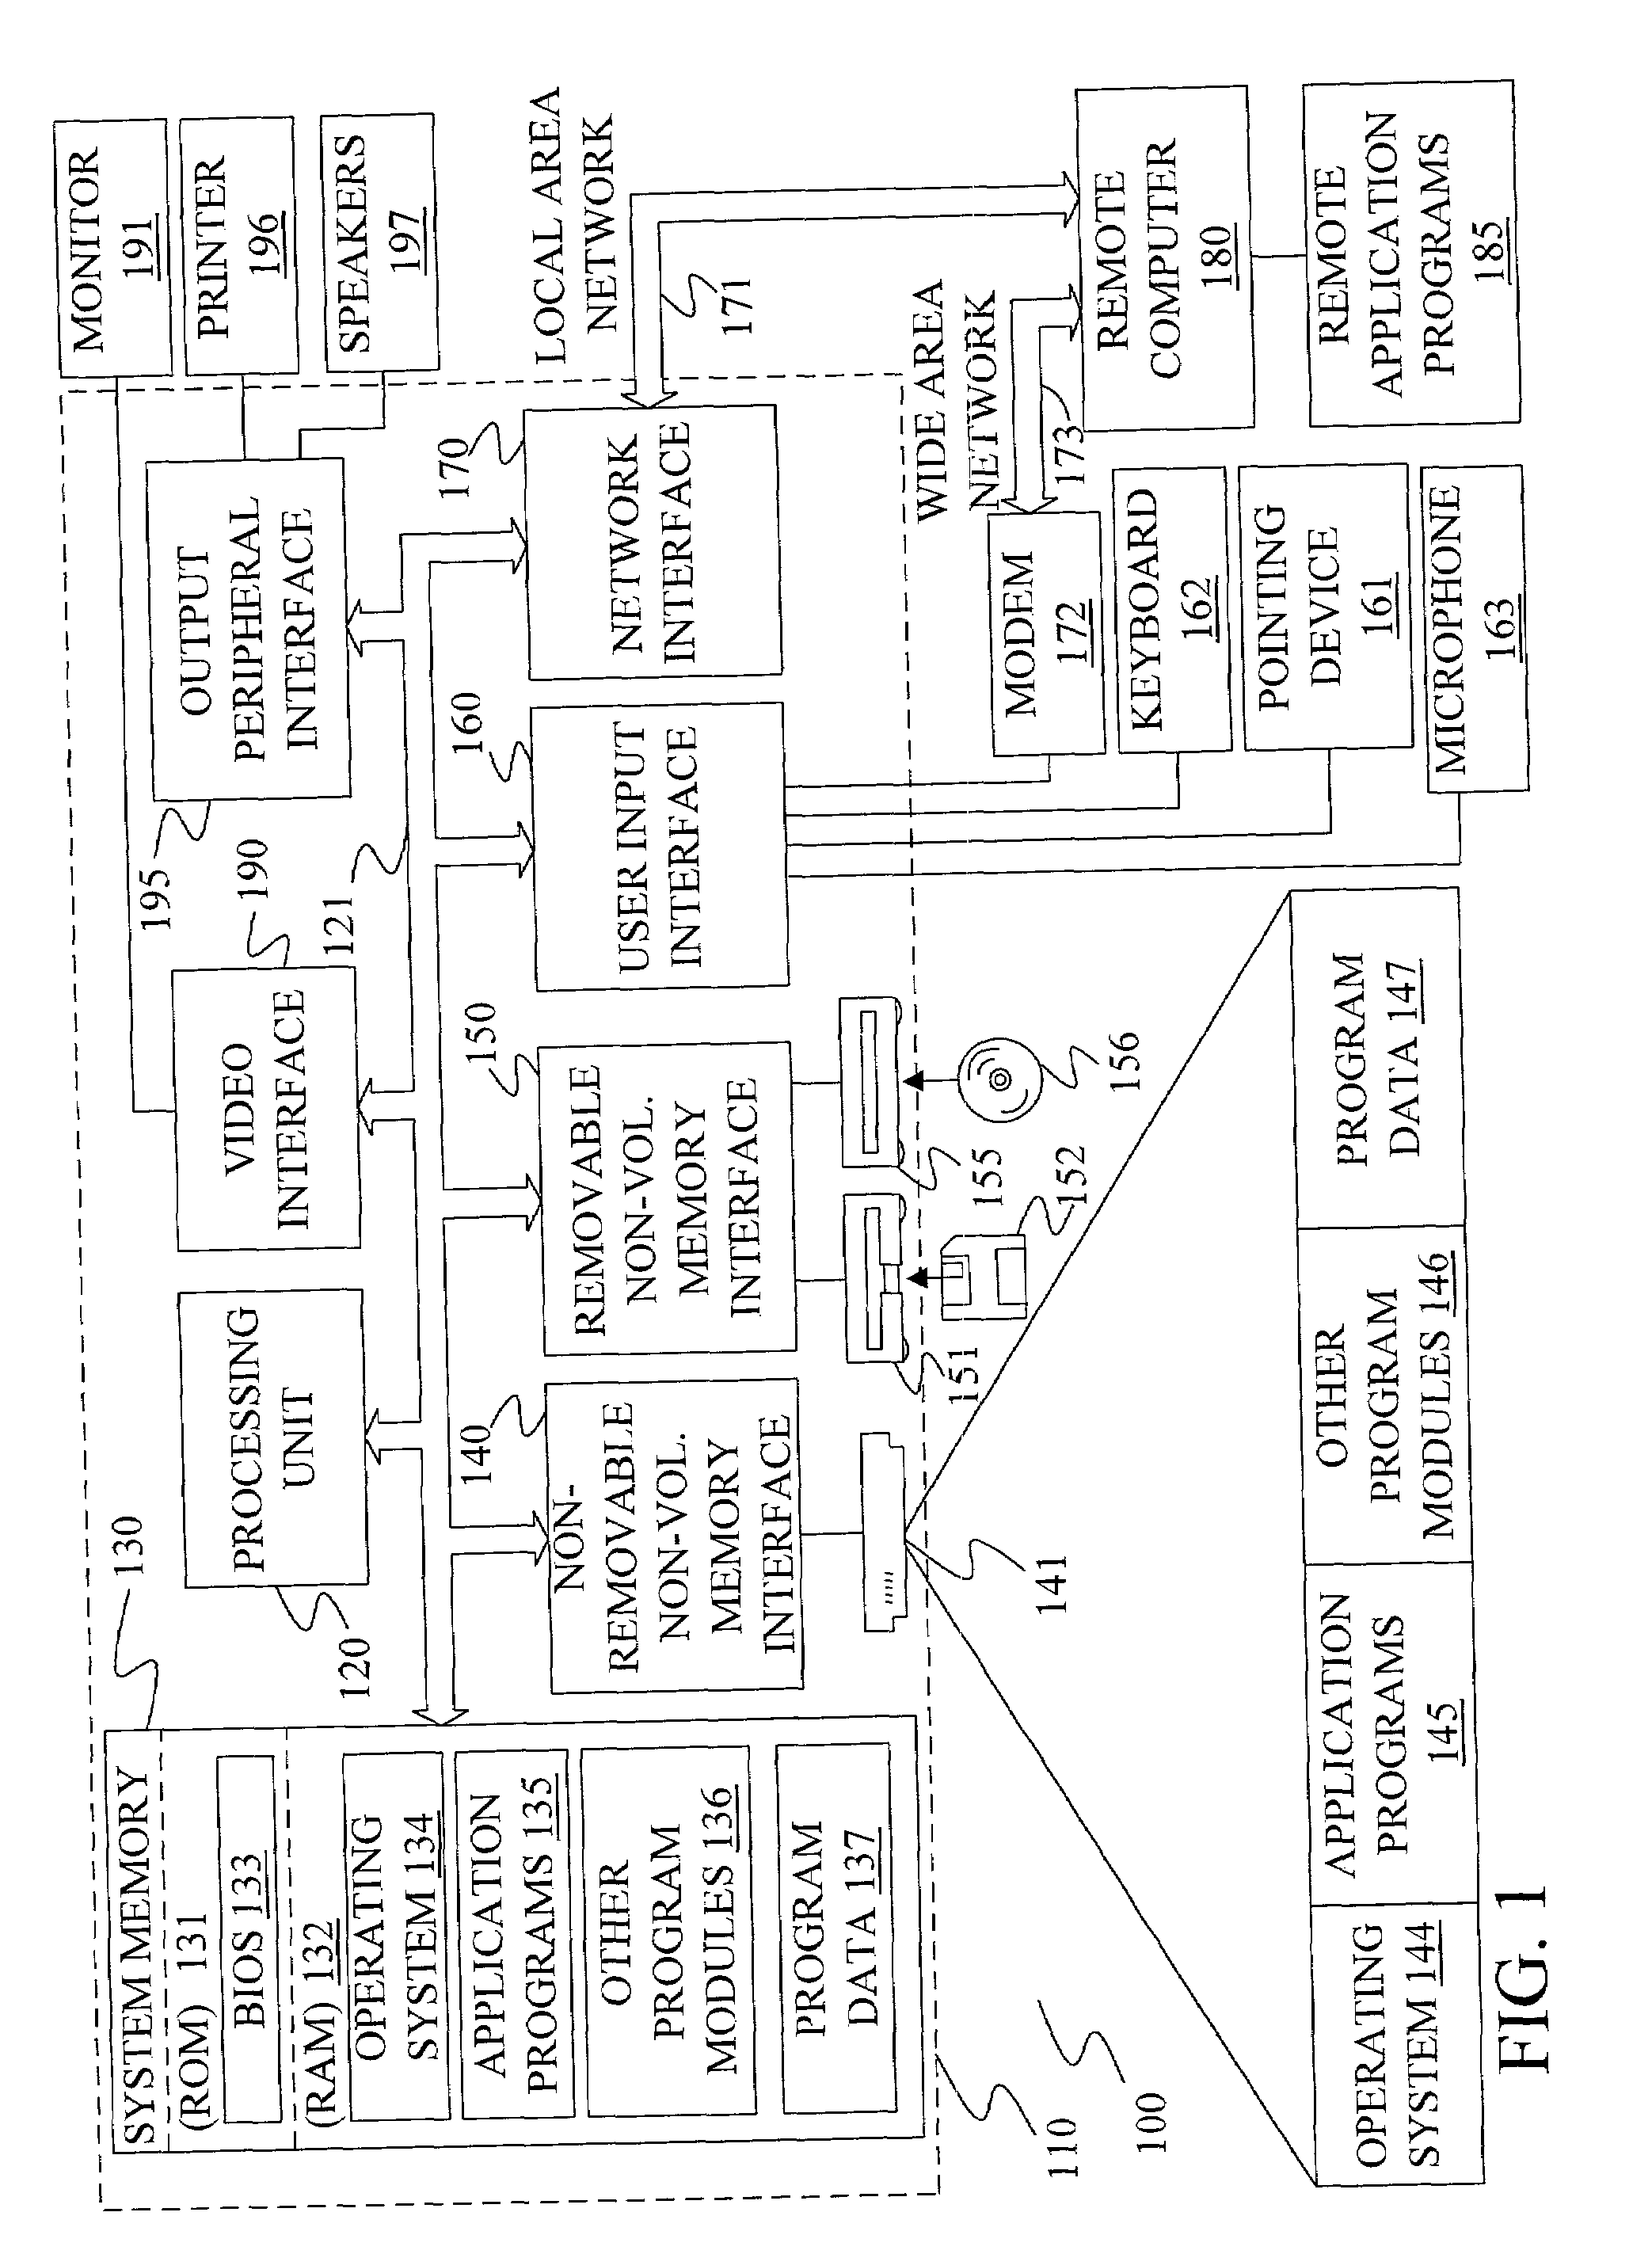 Method and apparatus for federated understanding